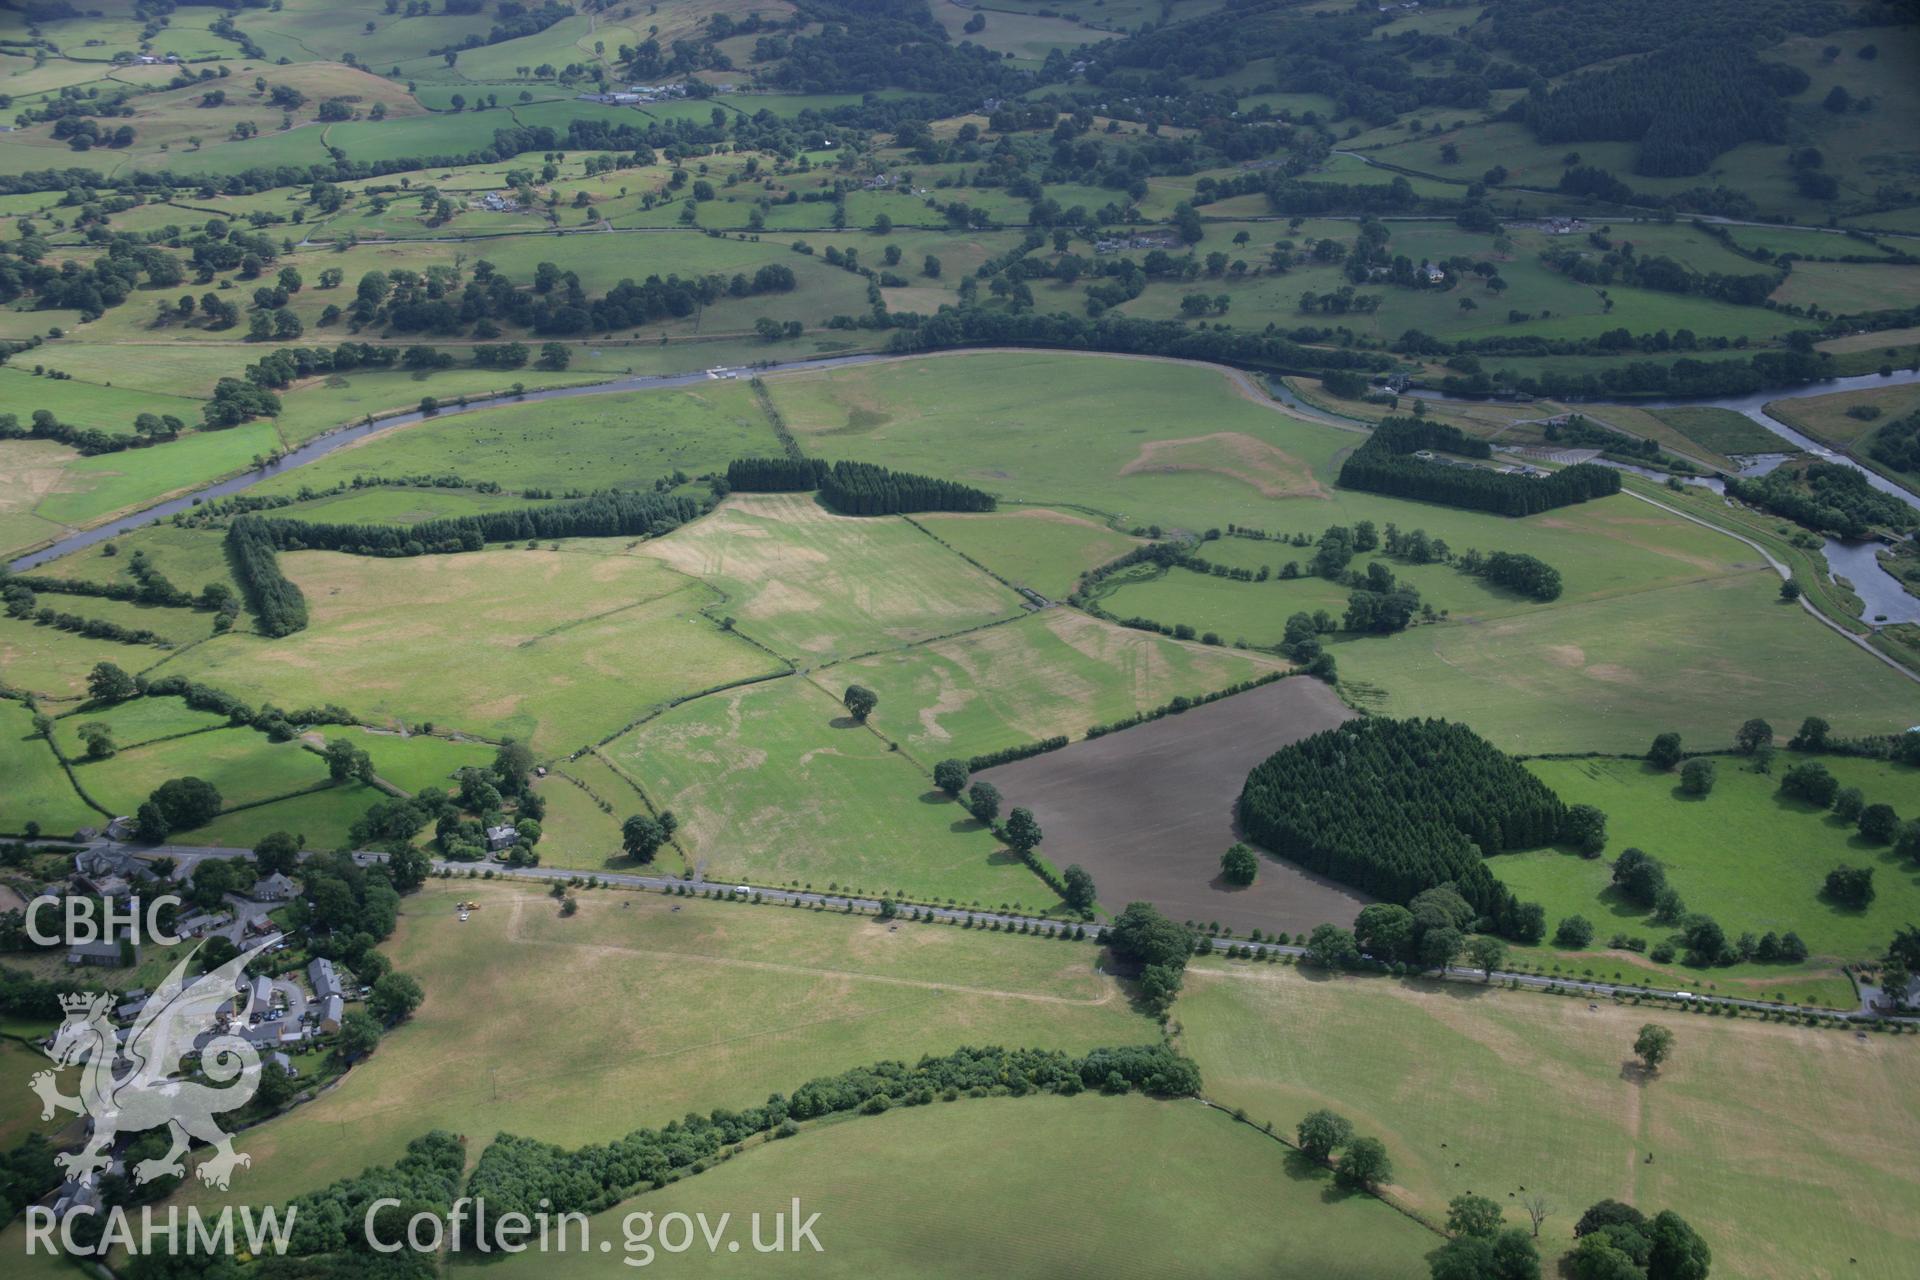 RCAHMW colour oblique aerial photograph of Llanfor Roman Military Complex visible in cropmarks, in general view from the north. Taken on 31 July 2006 by Toby Driver.